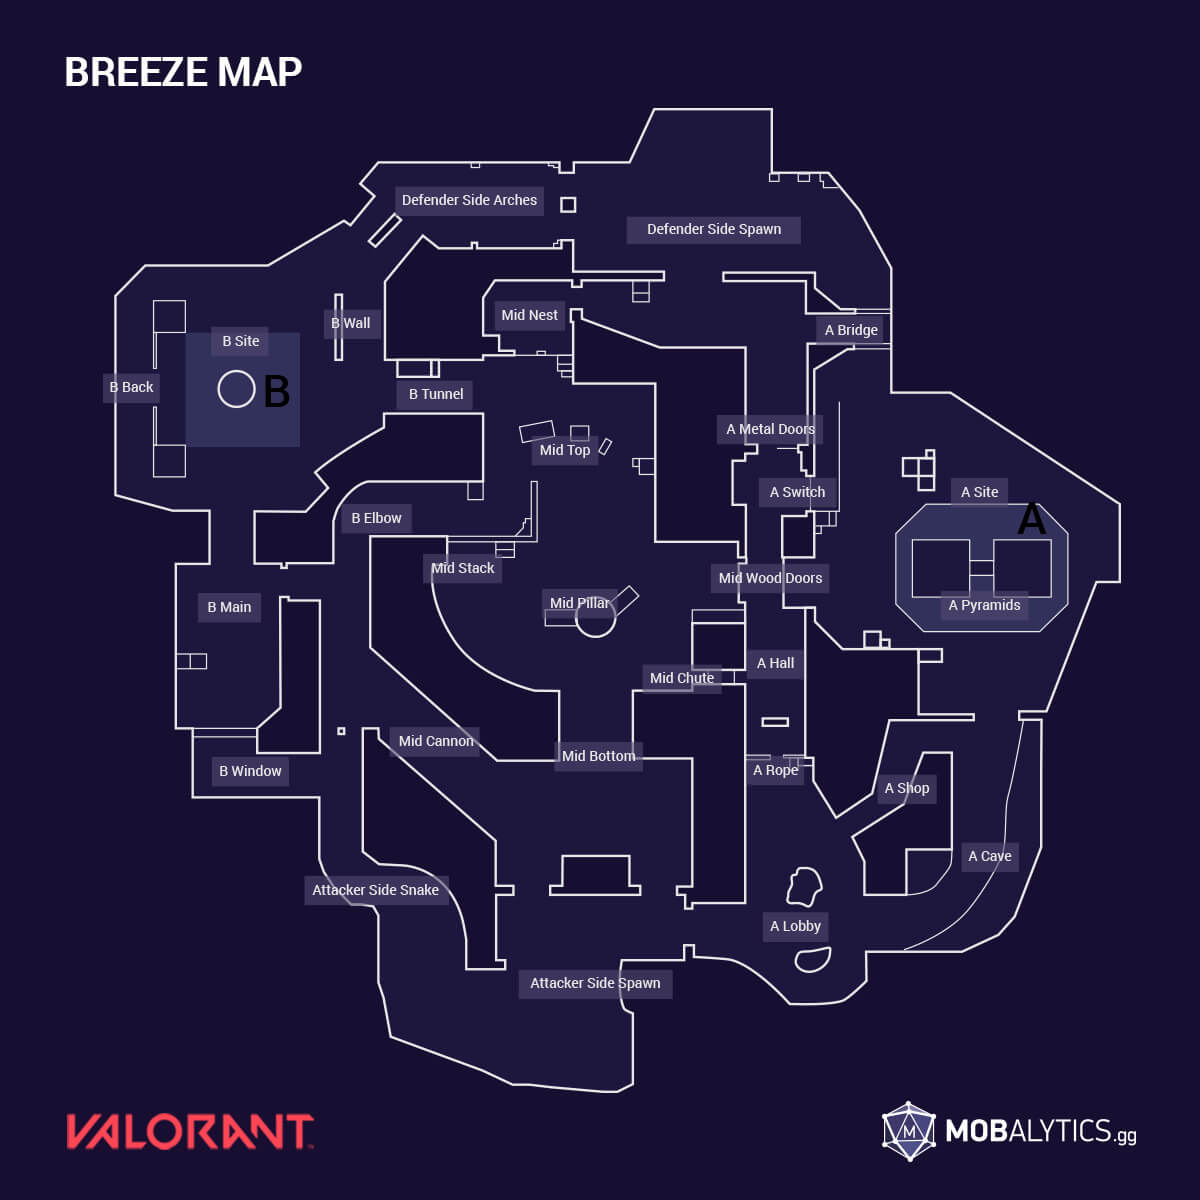 Breeze: Valorant Map Guide (Overview, Team Comp Recommendations